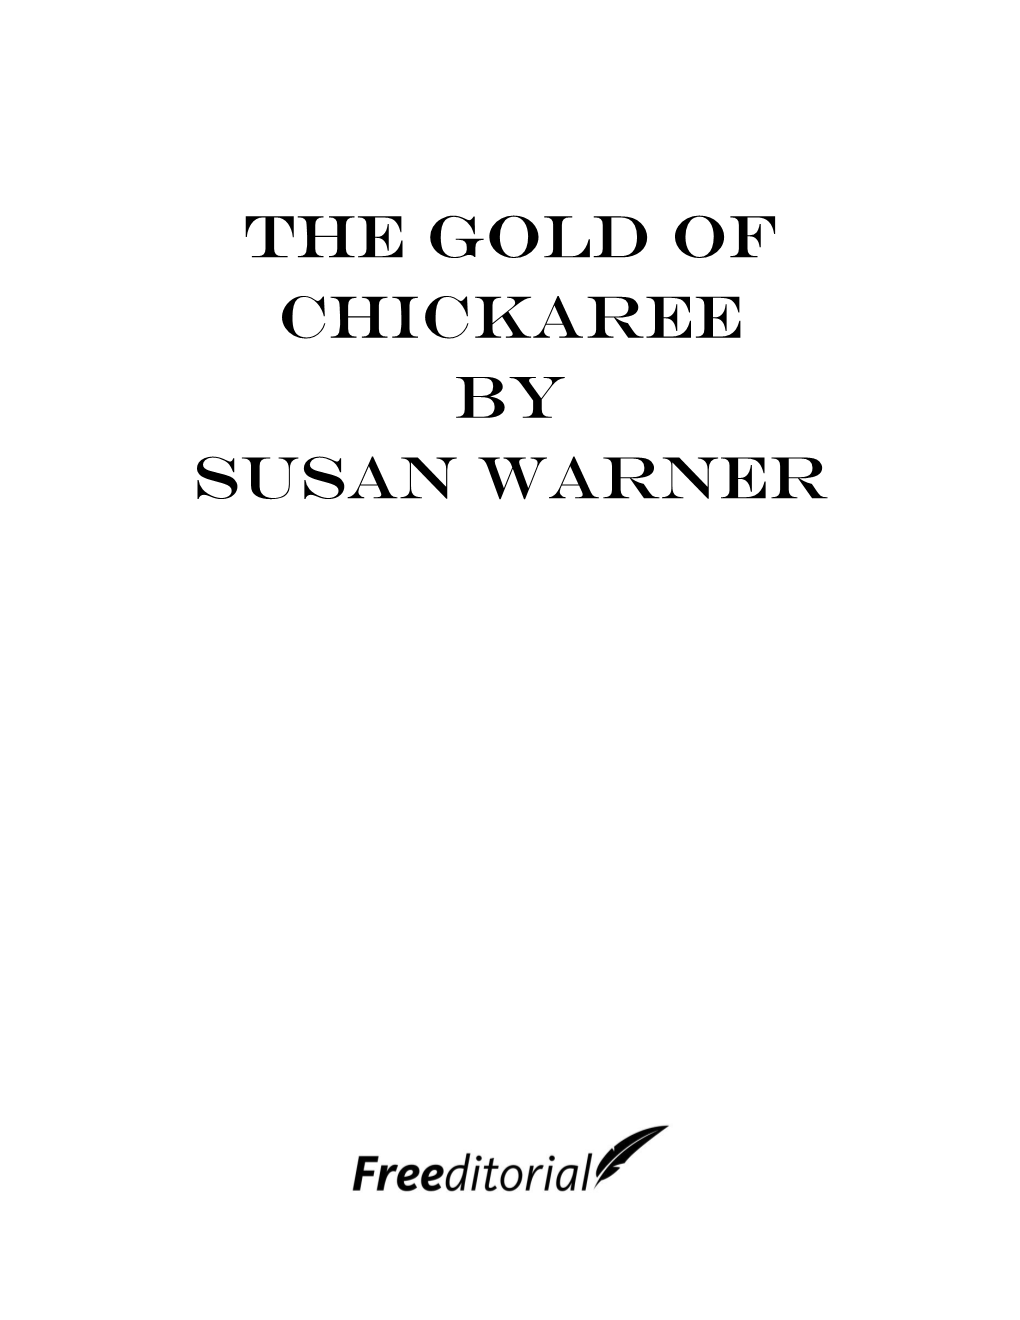 The Gold of Chickaree by Susan Warner